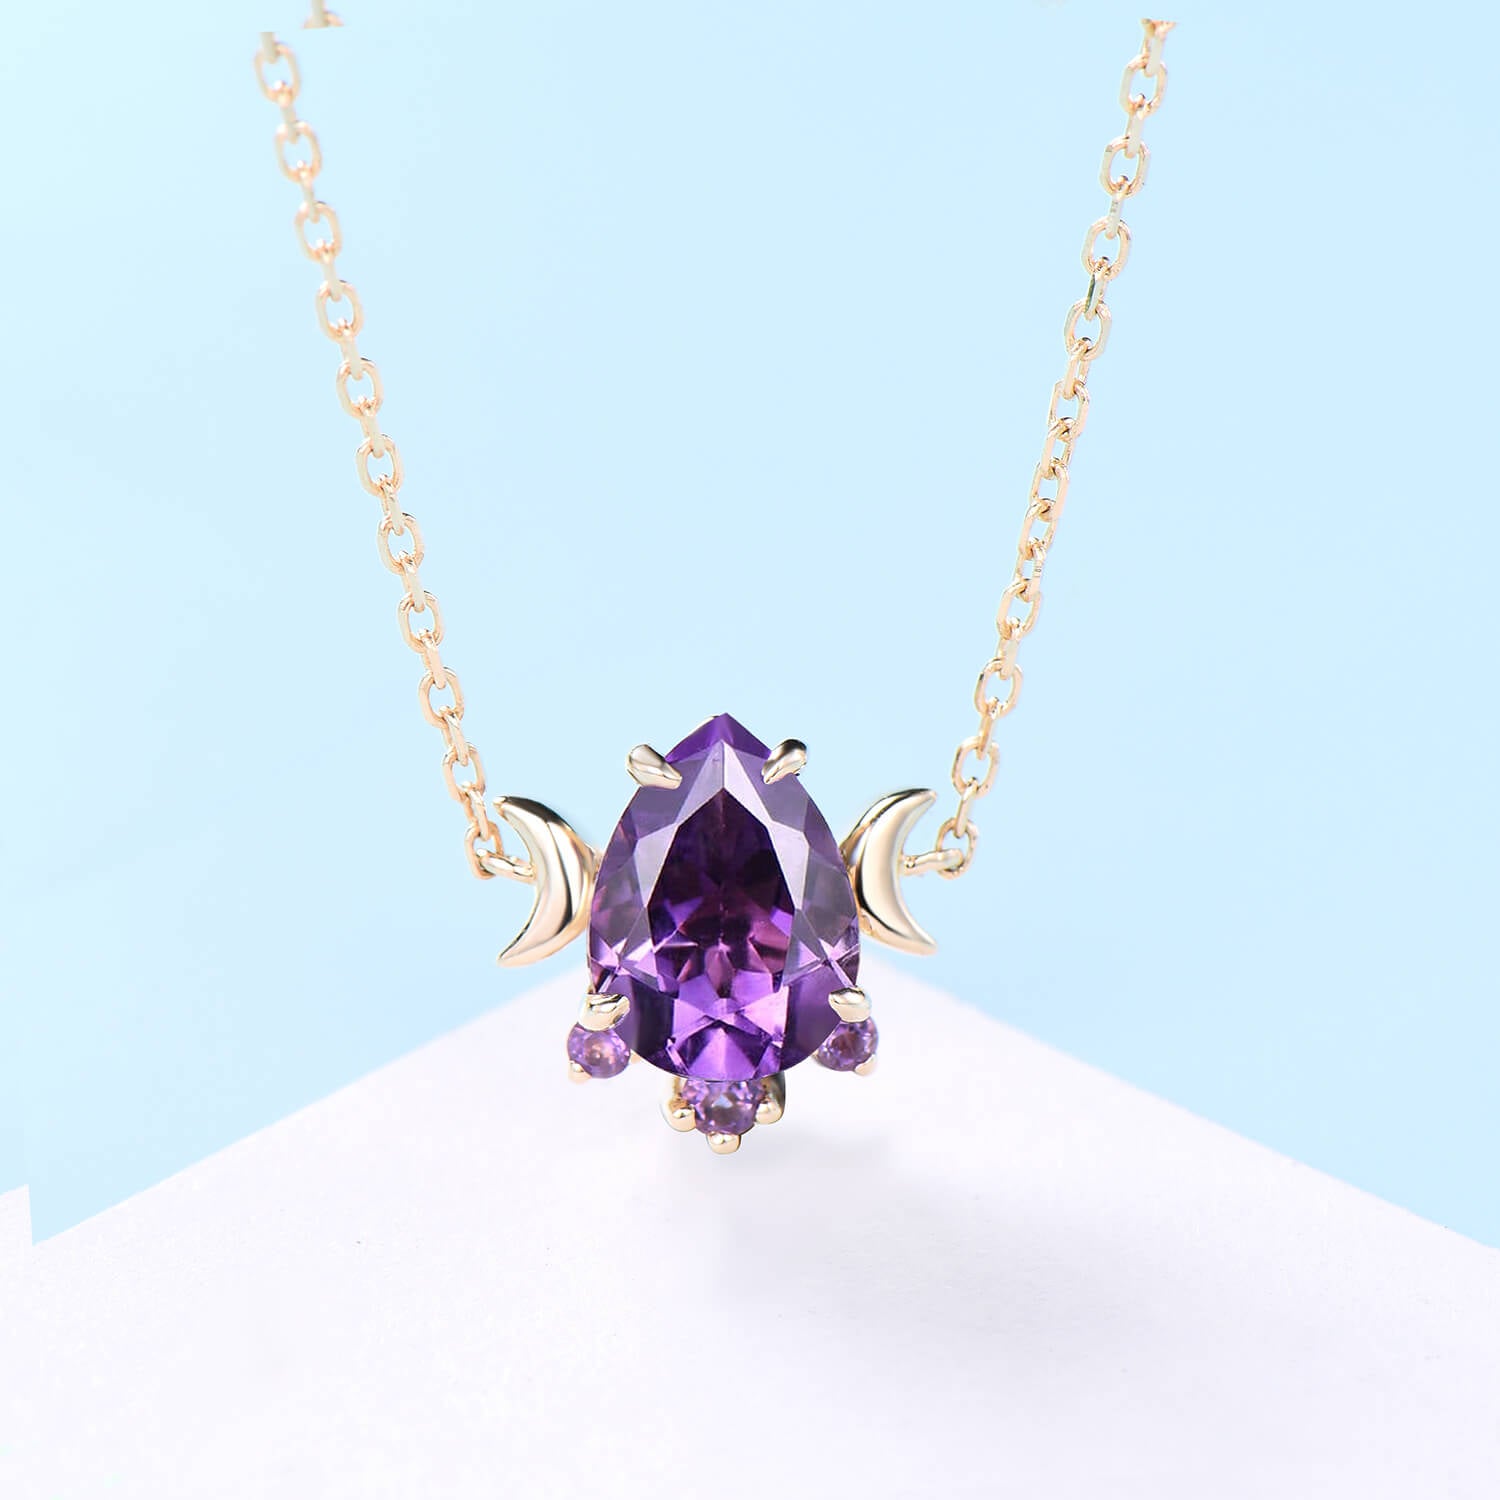 Dainty Pear Shaped Amethyst Pendant necklace Unique Crescent moon purple amethyst necklace for women celestial anniversary gift for her - PENFINE